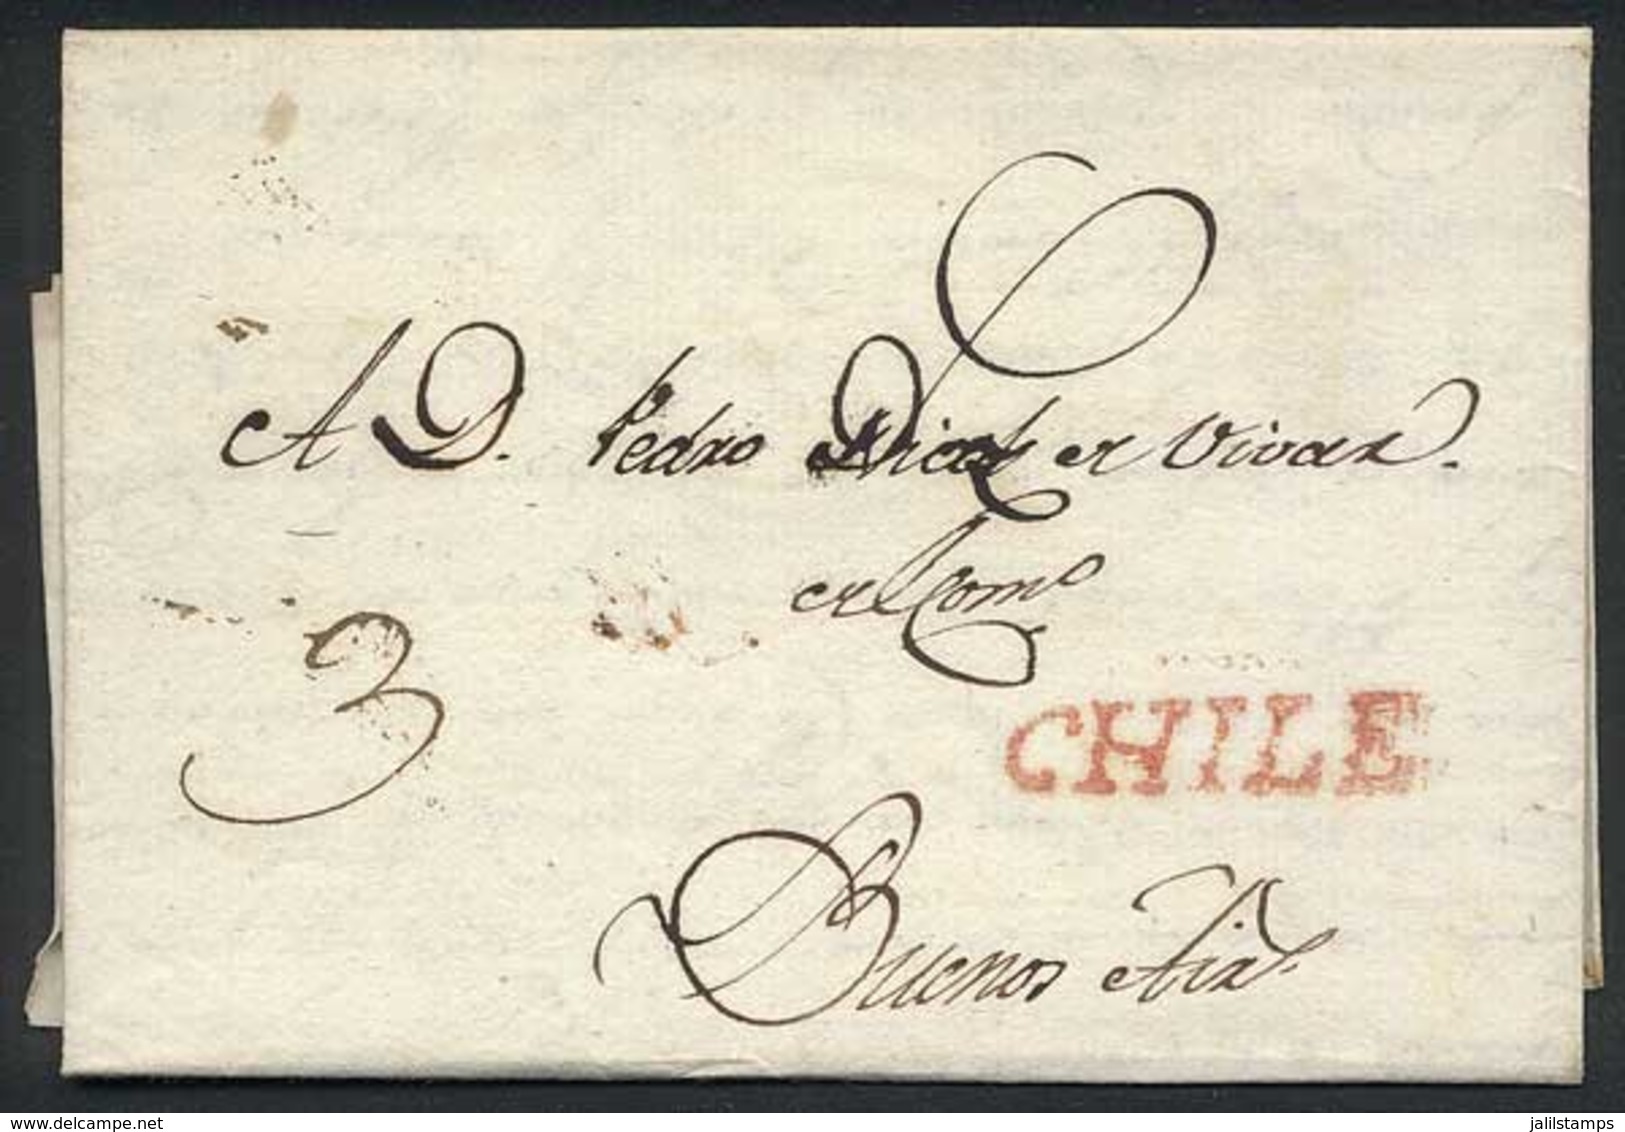 CHILE: Long And Interesting Complete Folded Letter Datelined Santiago 10/DE/1812, Sent To Buenos Aires, With Red "CHILE" - Chile